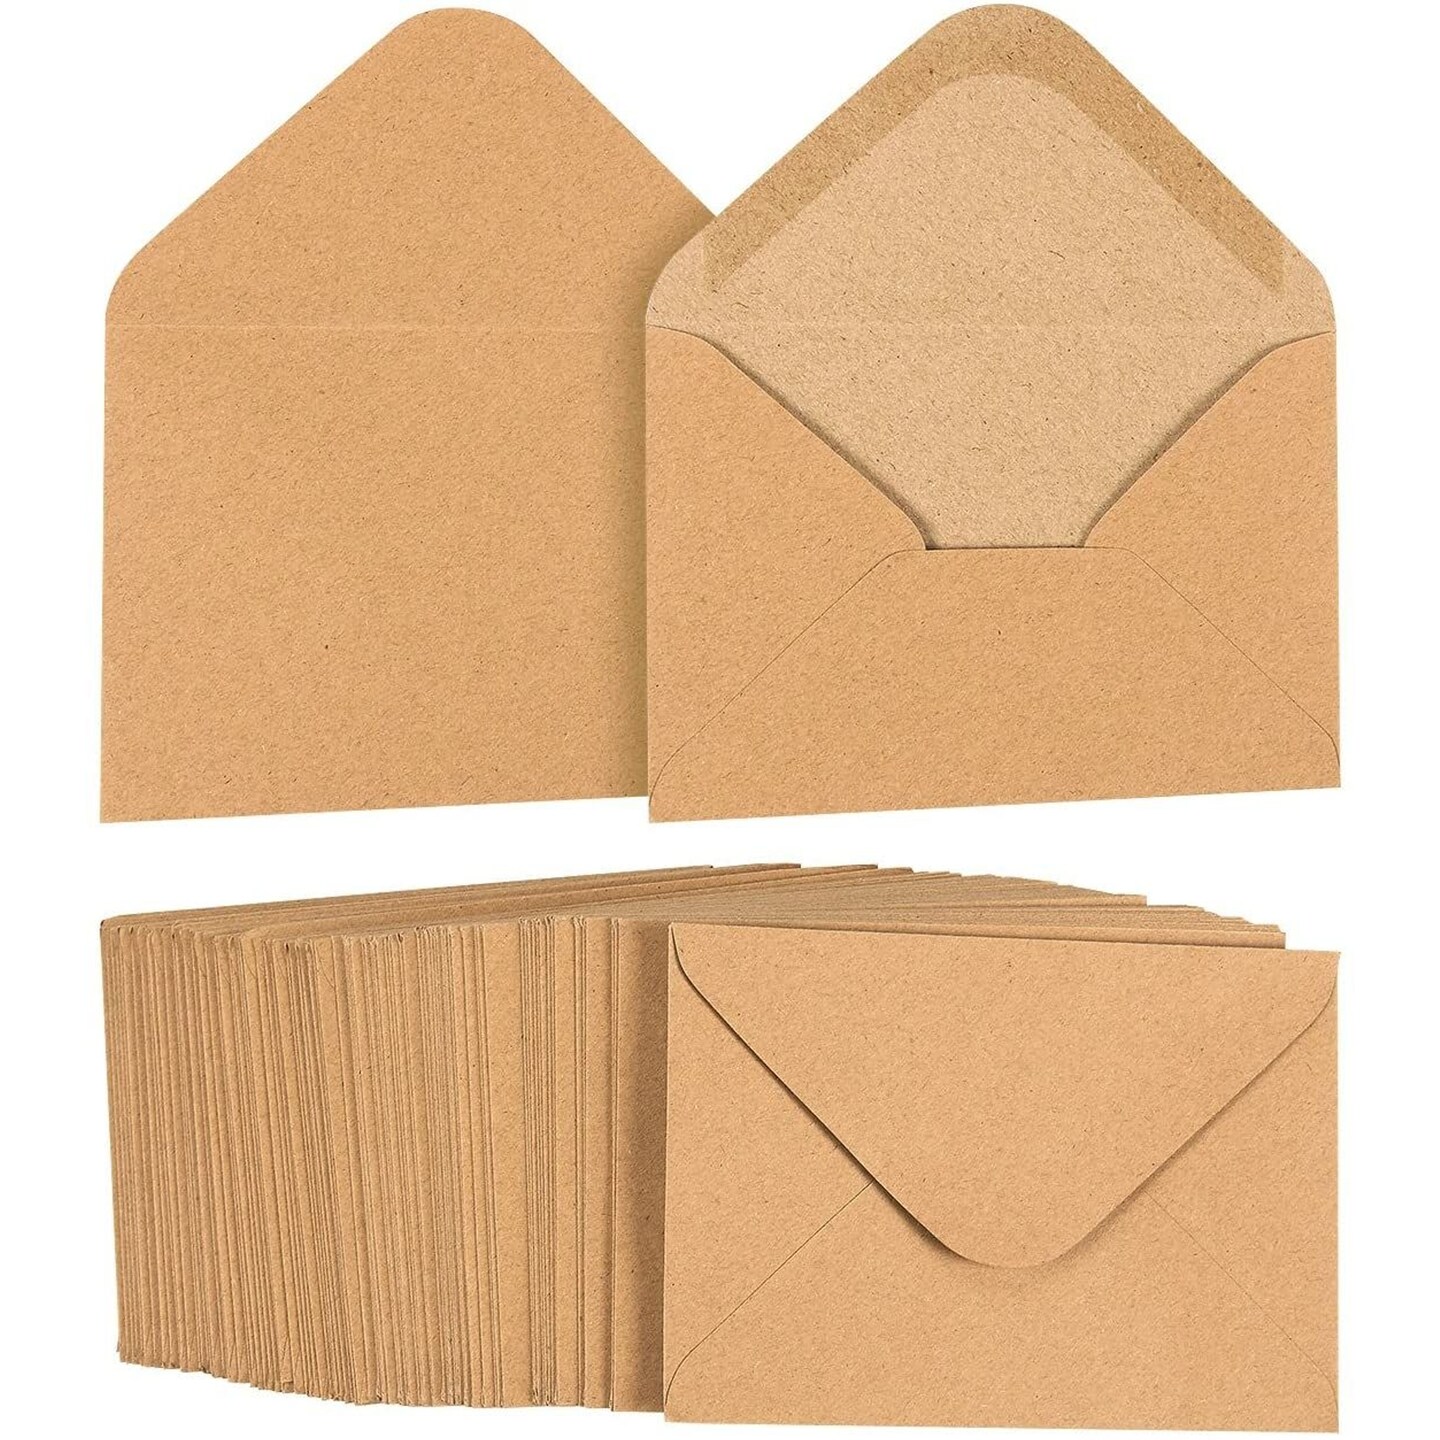 100 Pack Small Kraft Paper A1 Envelopes for 3x5 inches Cards, Invitations, Wedding RSVP, Gift Cards (V-Flap)